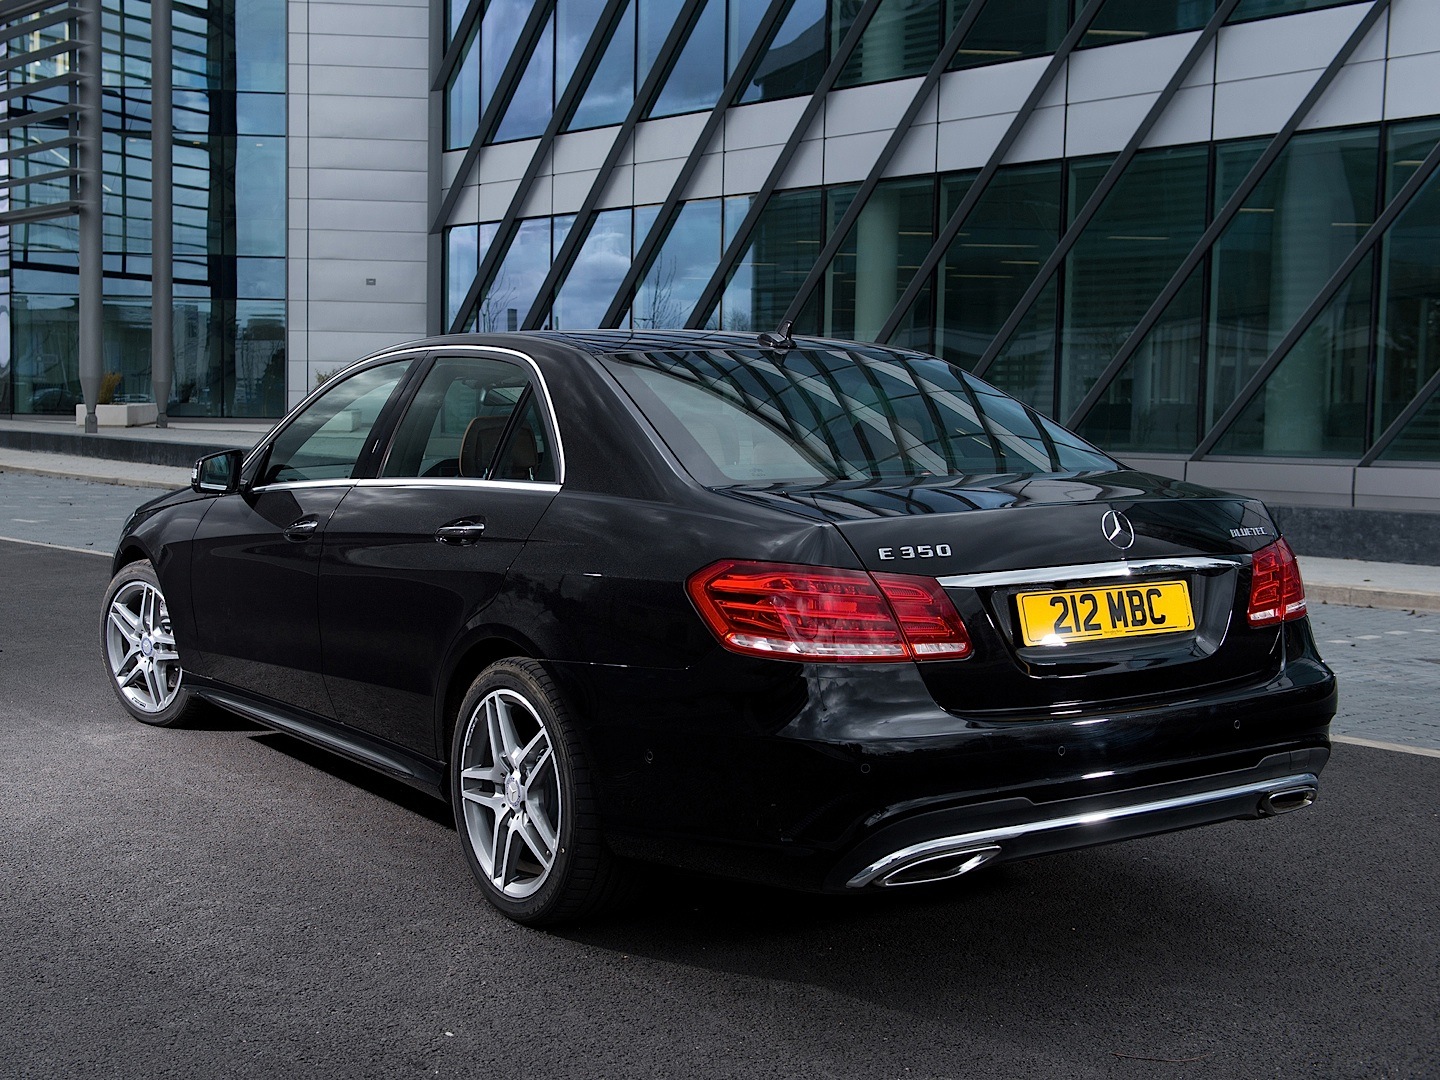 Why The W212 Is One Of THE MOST RELIABLE Cars ever. Secondhand Mercedes E  Class 2013-16 Buyer Guide. 